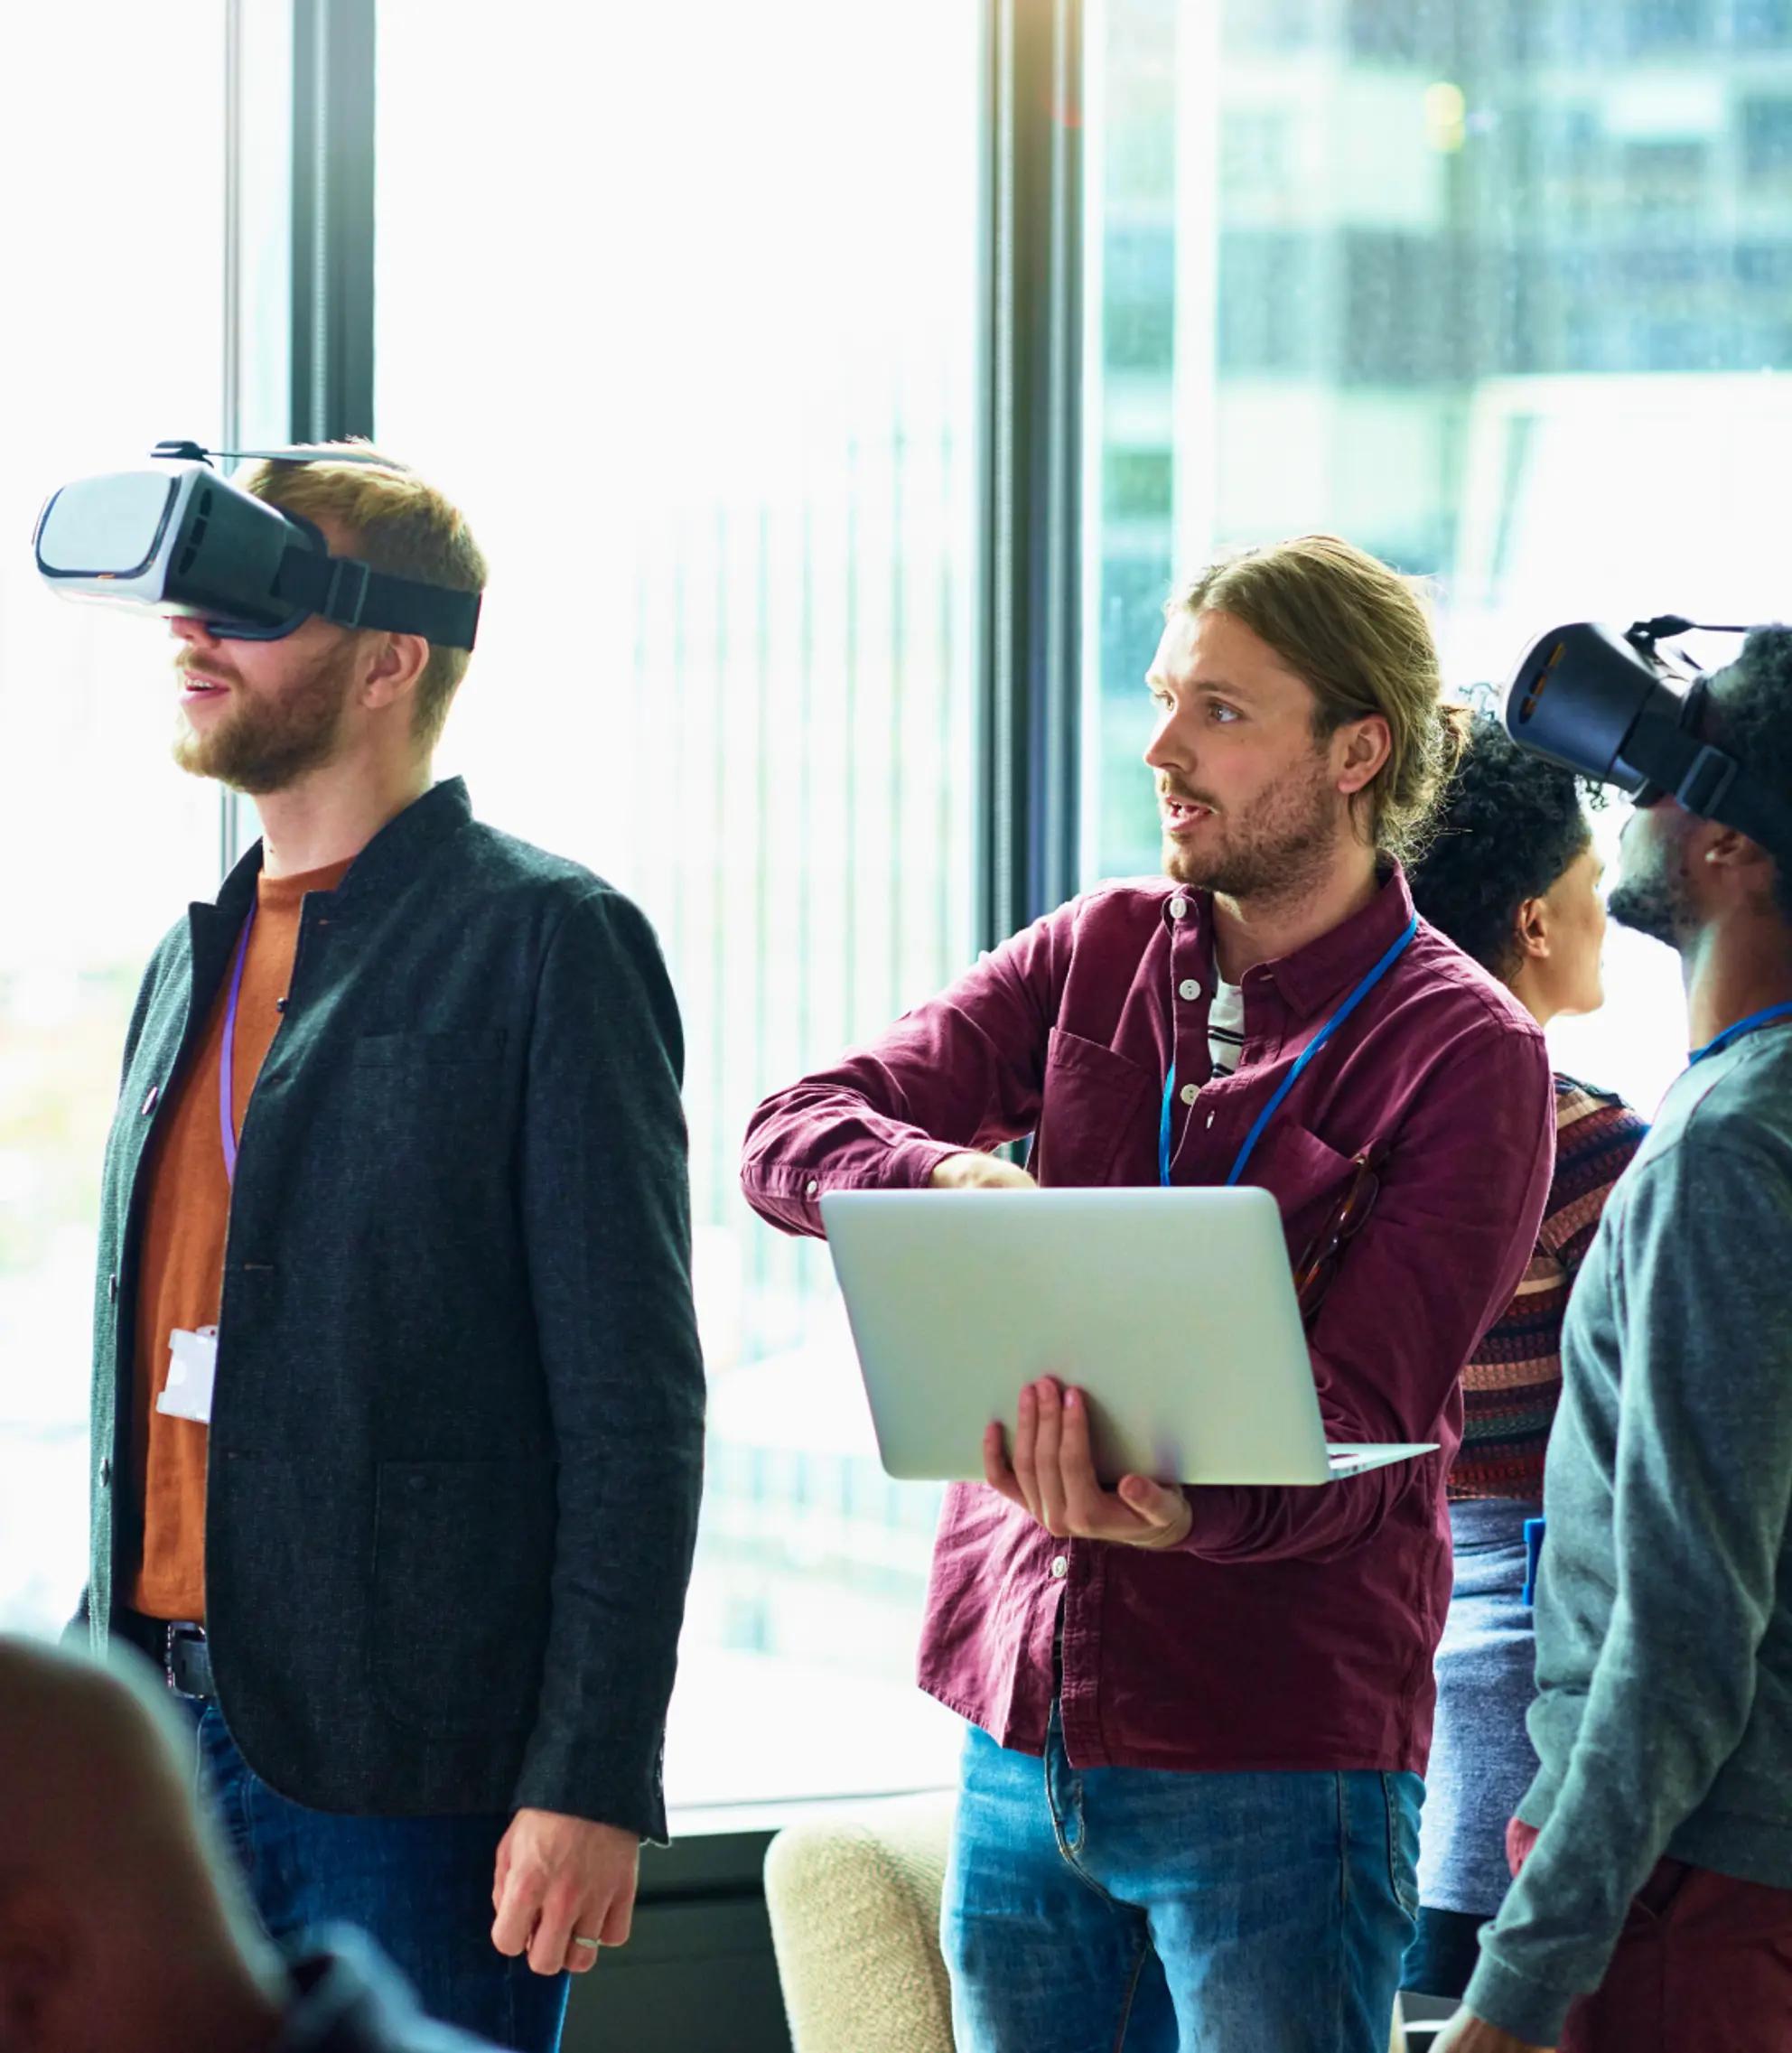 Immersive learning will shape the future of work